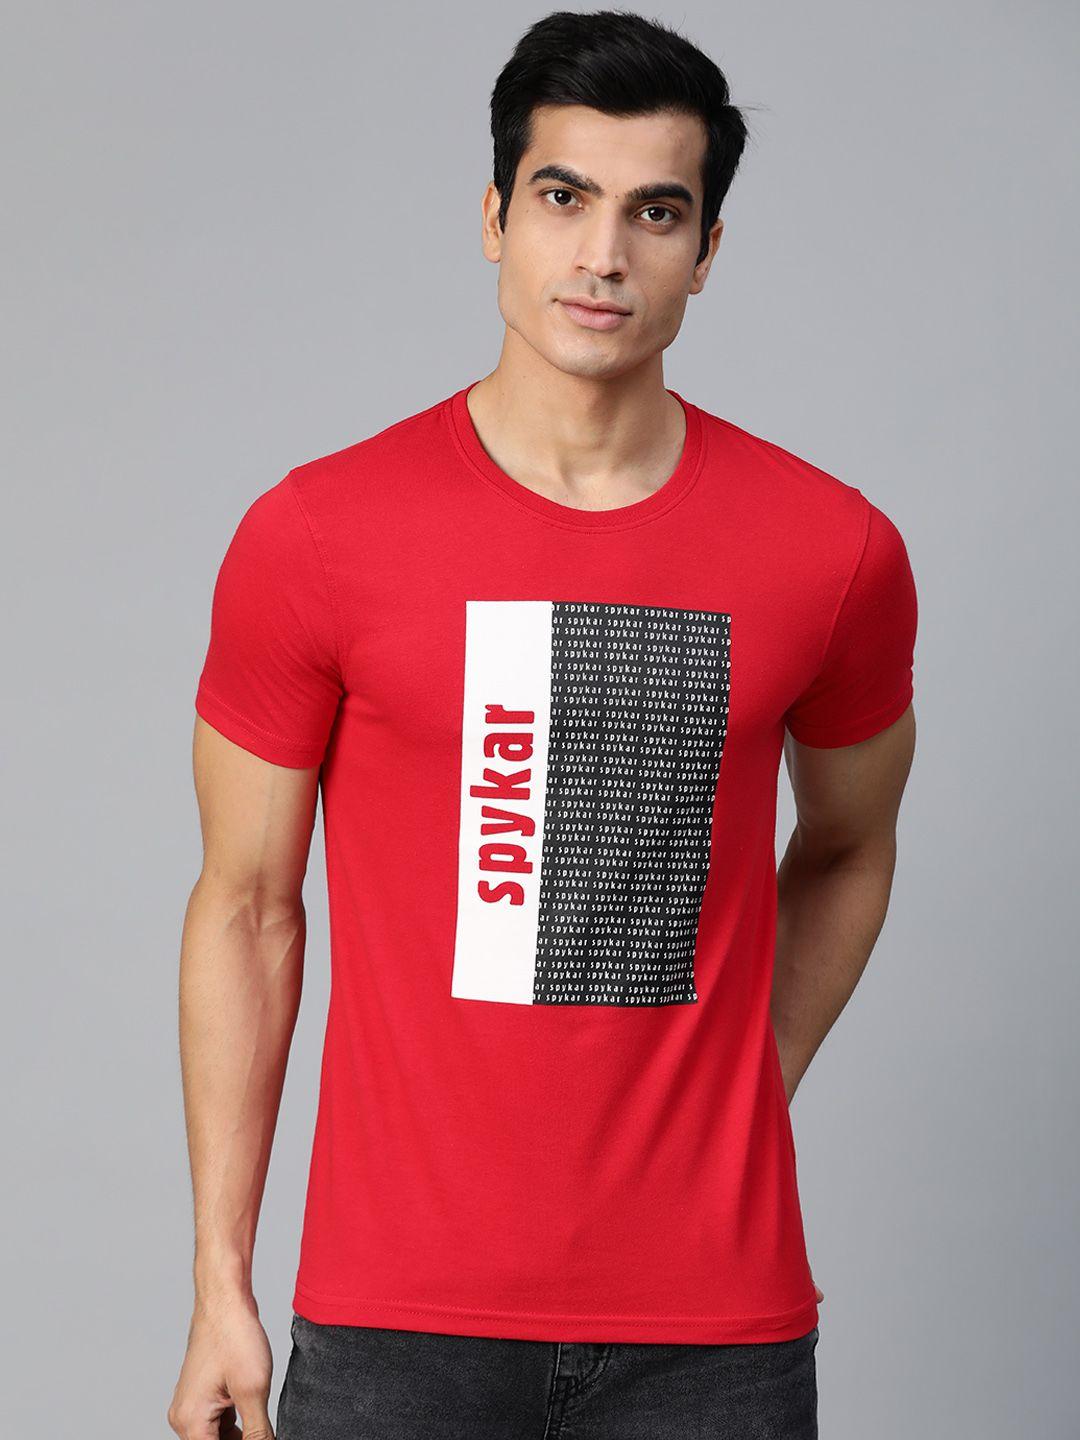 underjeans by spykar men red printed round neck t-shirt